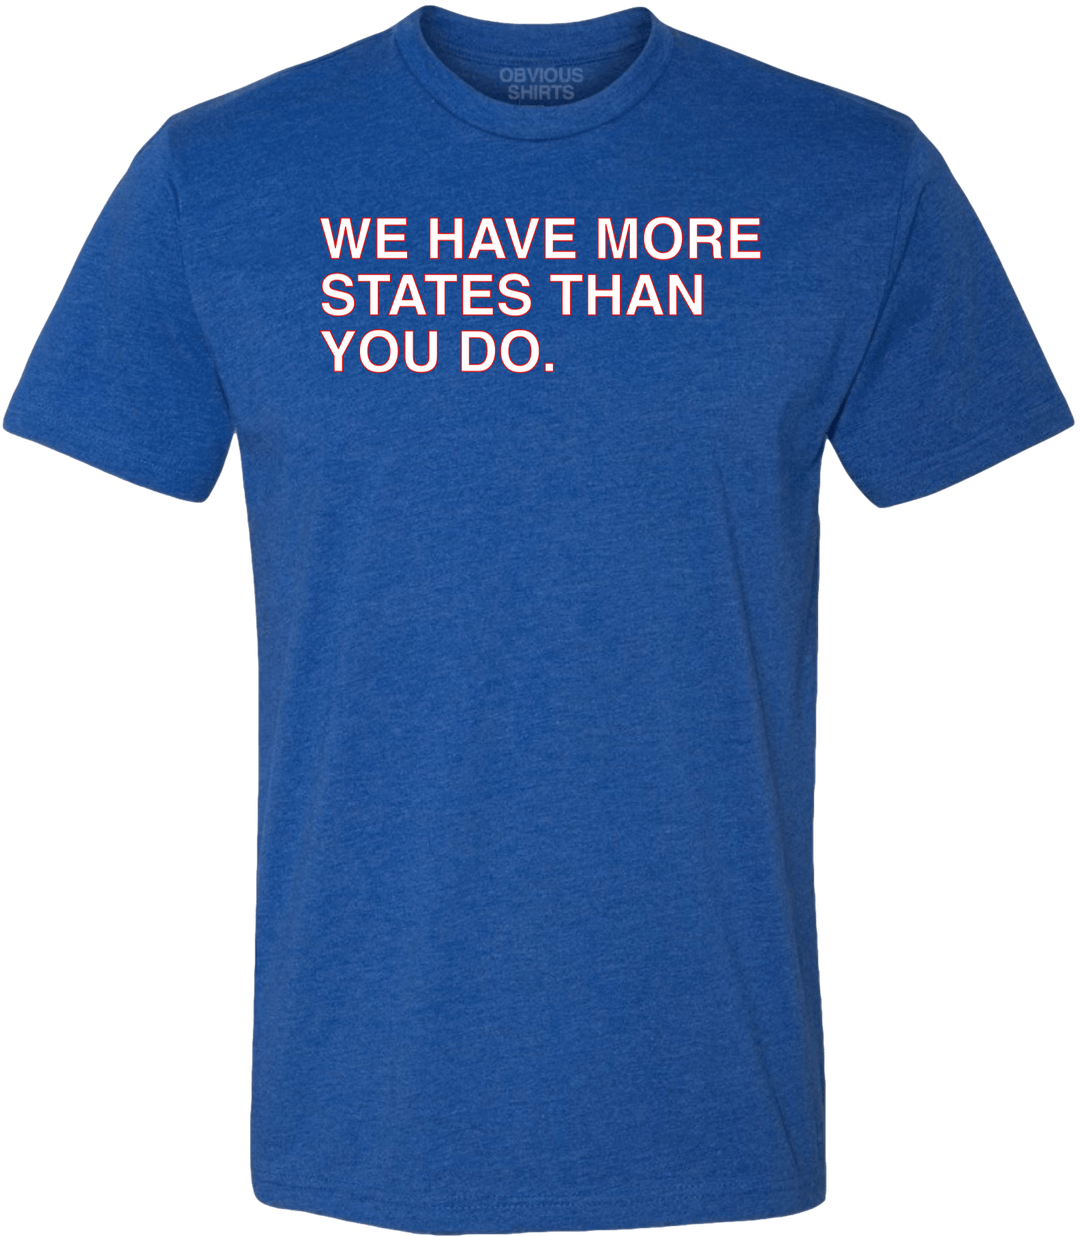 WE HAVE MORE STATES THAN YOU DO. - OBVIOUS SHIRTS